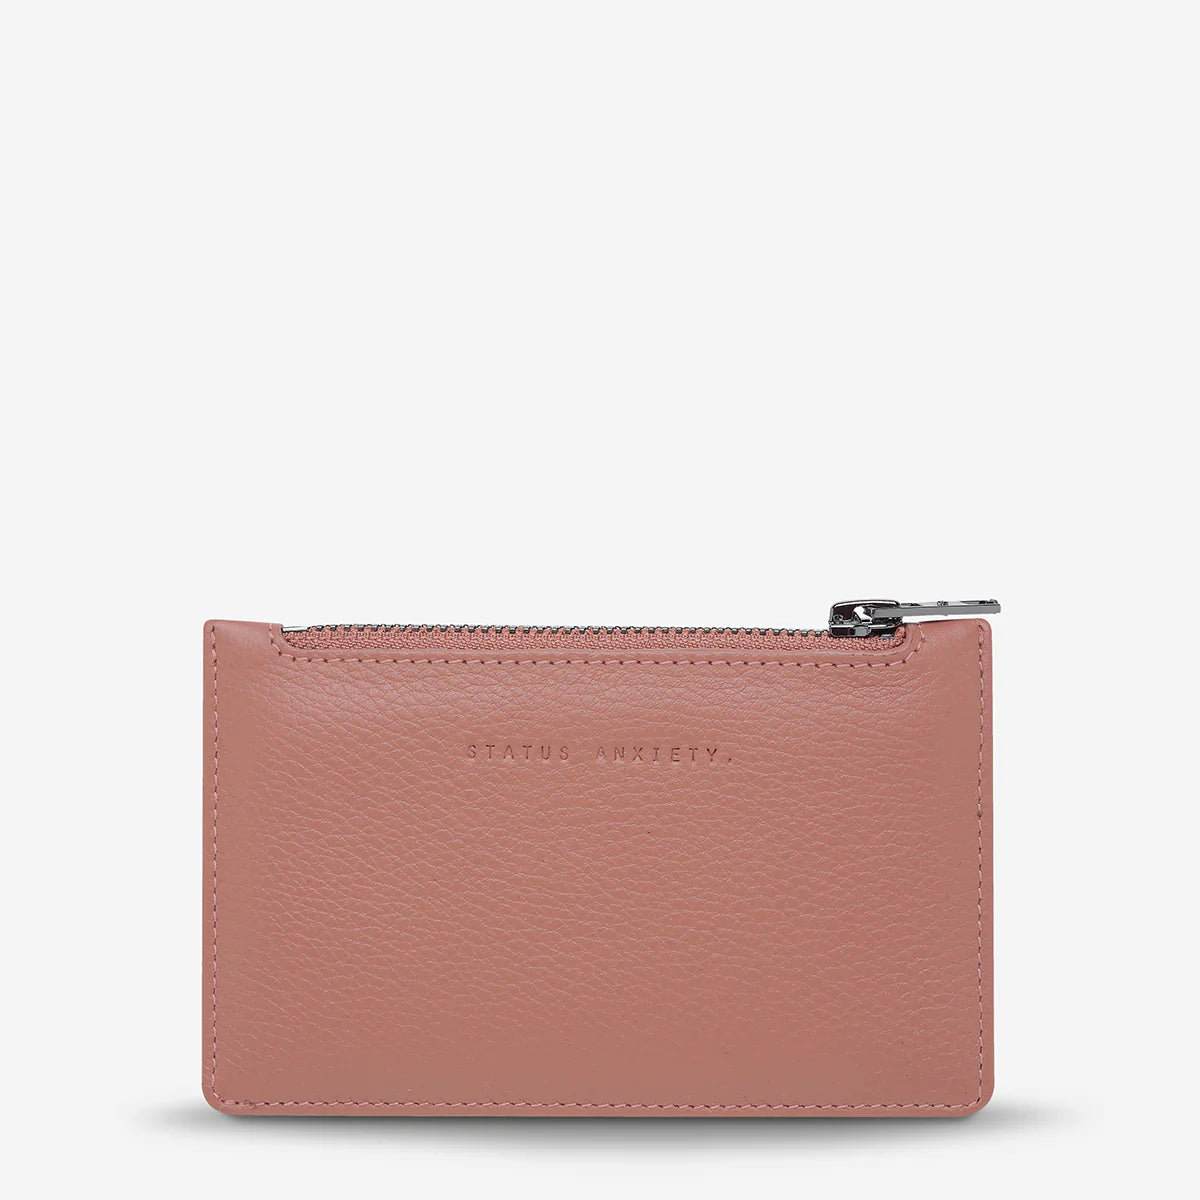 Status Anxiety Wallet - Avoiding Things - Multiple options